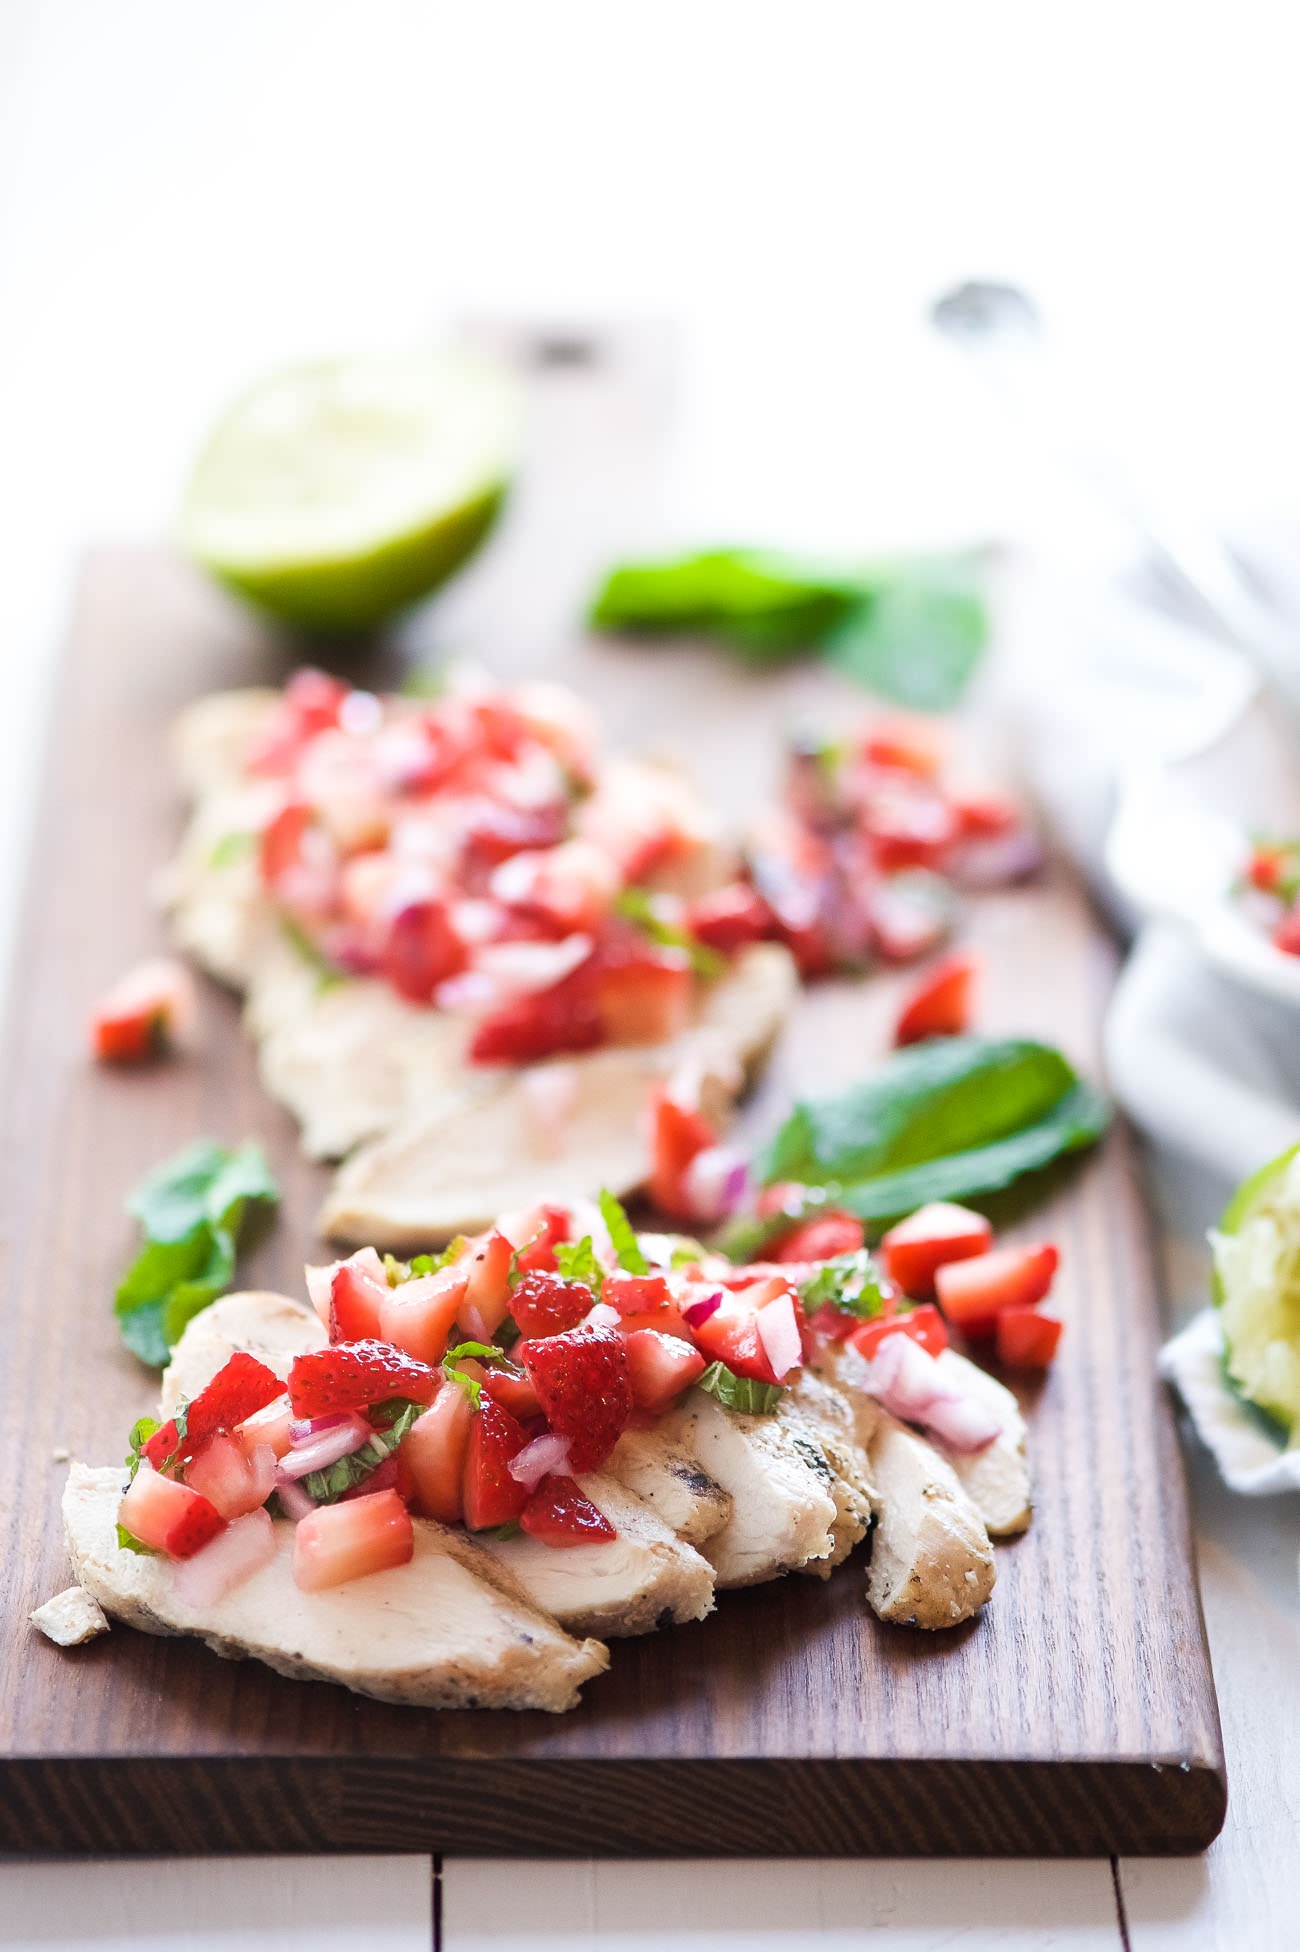 Balsamic Grilled Chicken with Strawberry Mint Salsa is a fresh spin on dinner! Fresh strawberries, mint and lime make the ideal summer topping for juicy grilled chicken!